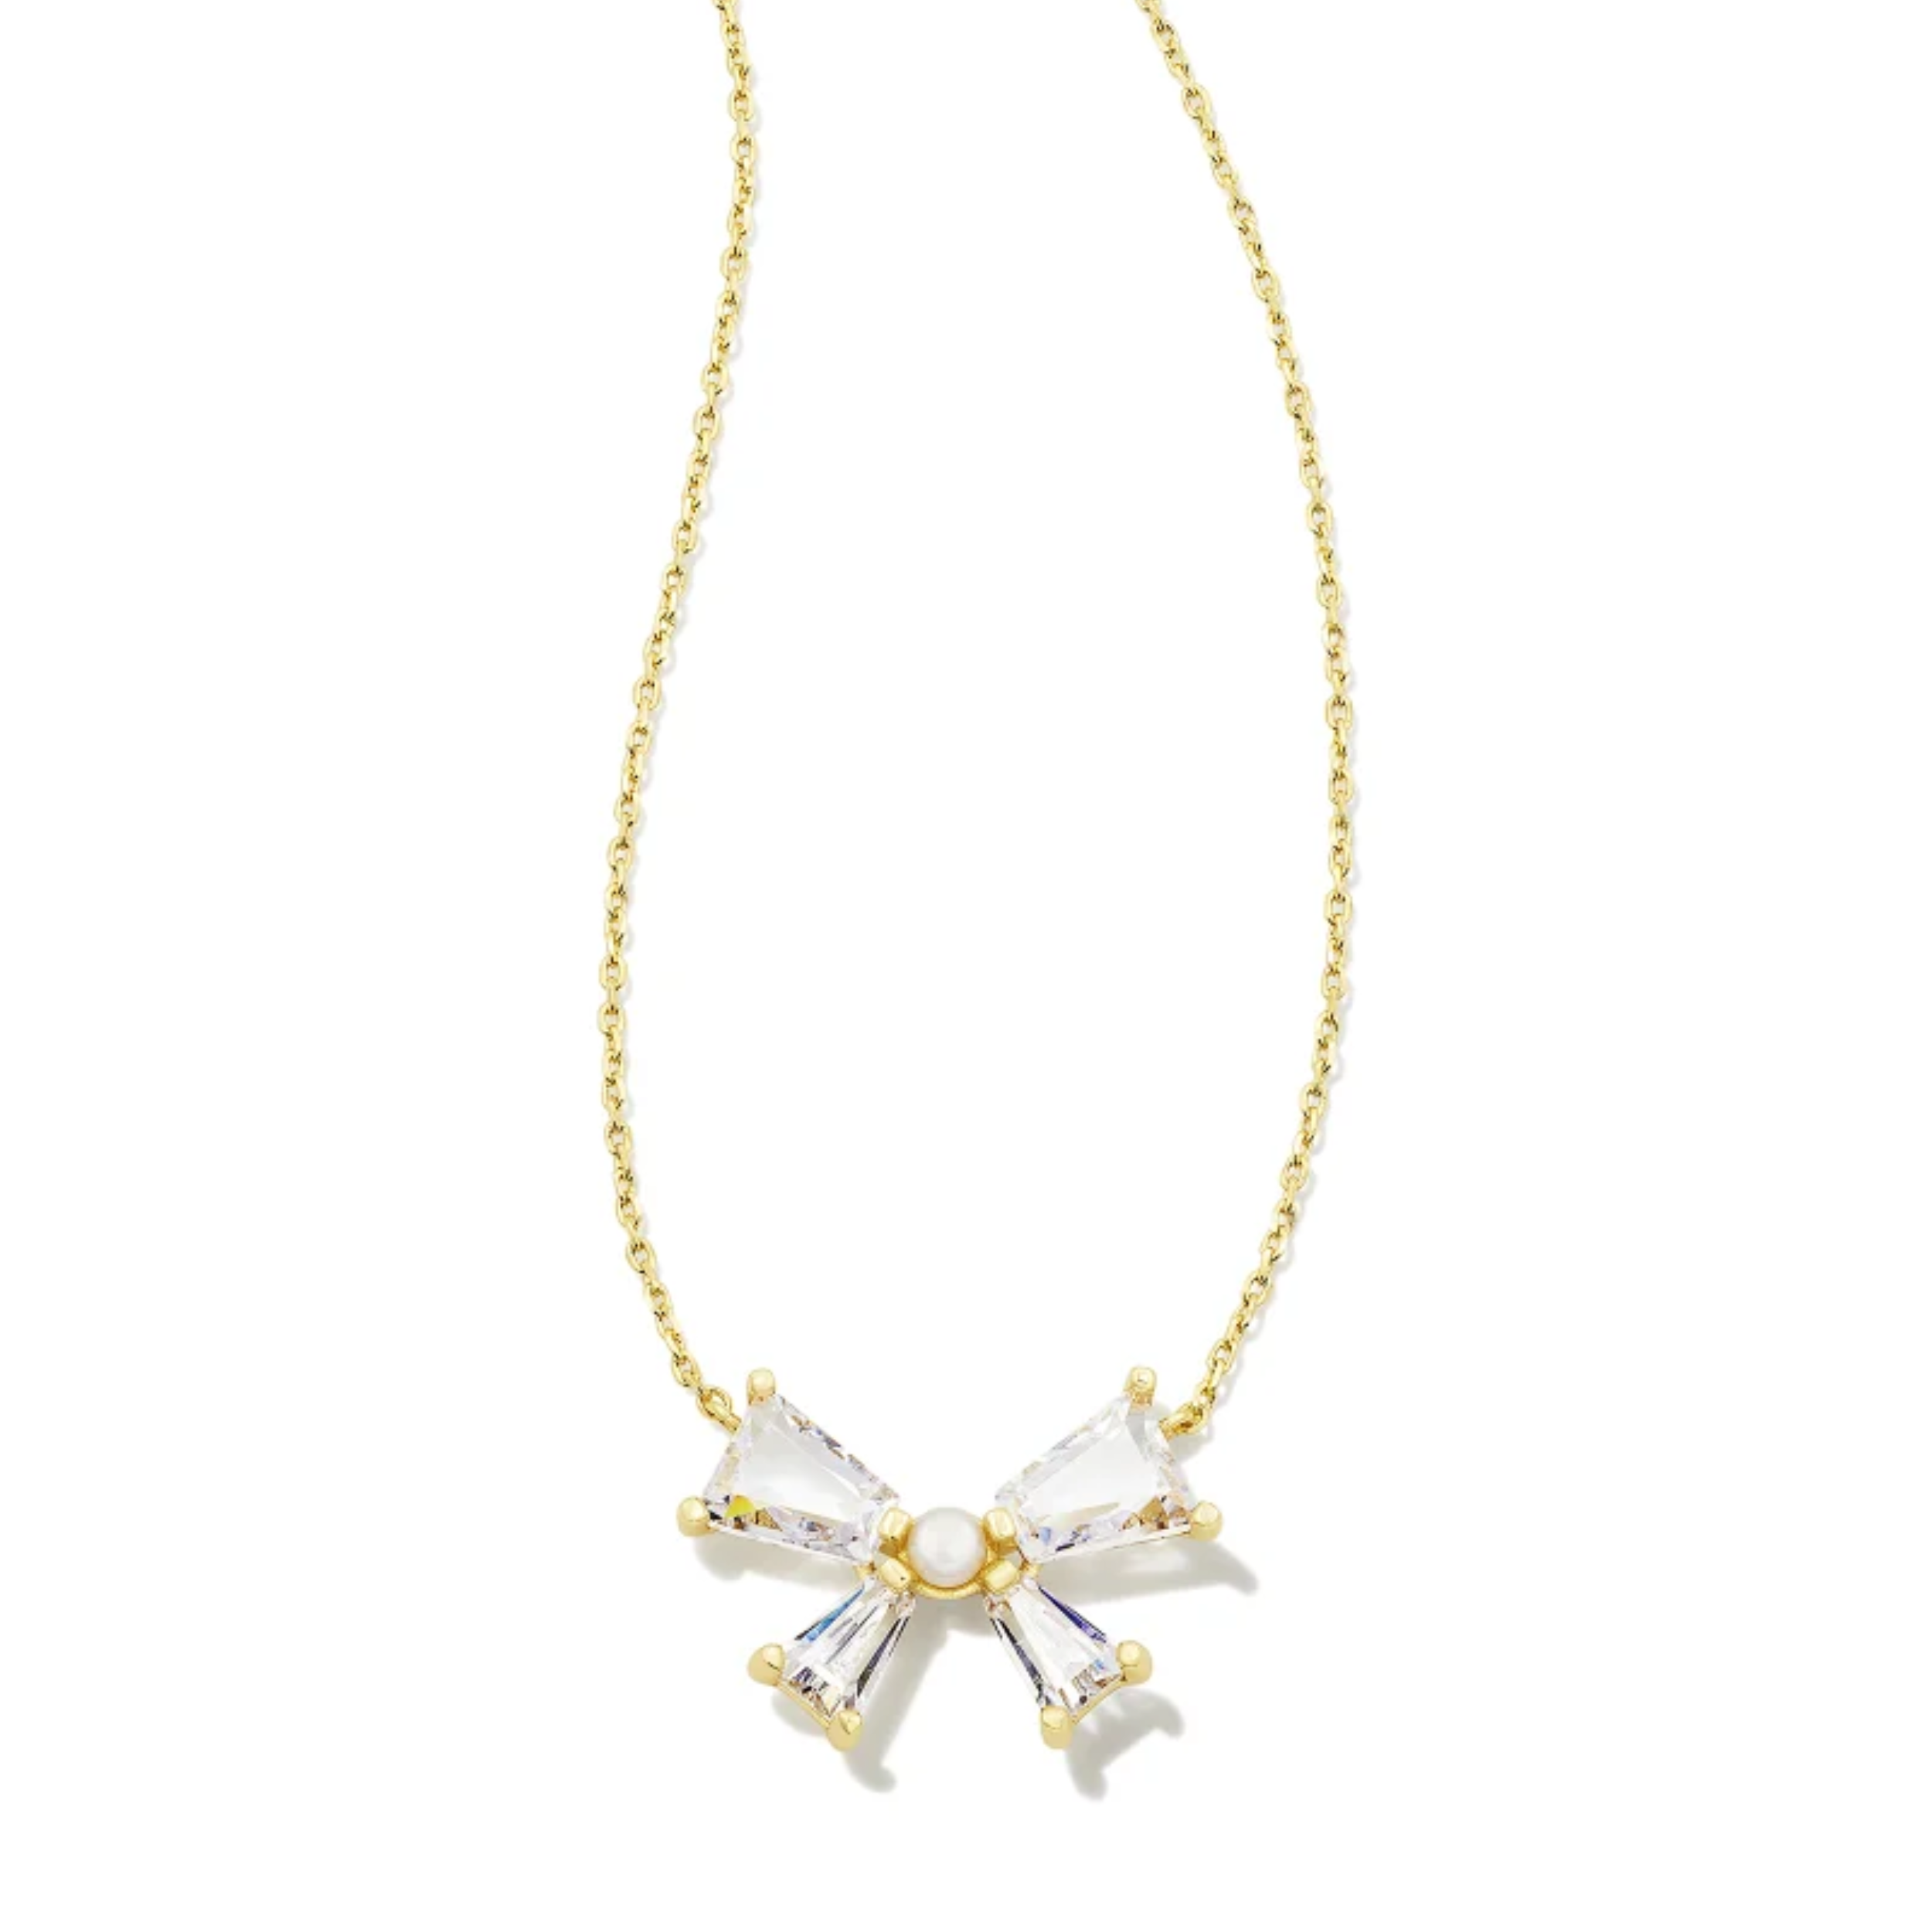 This Blair Gold Bow Pendent Necklace in White by Kendra Scott is pictured on a white background.